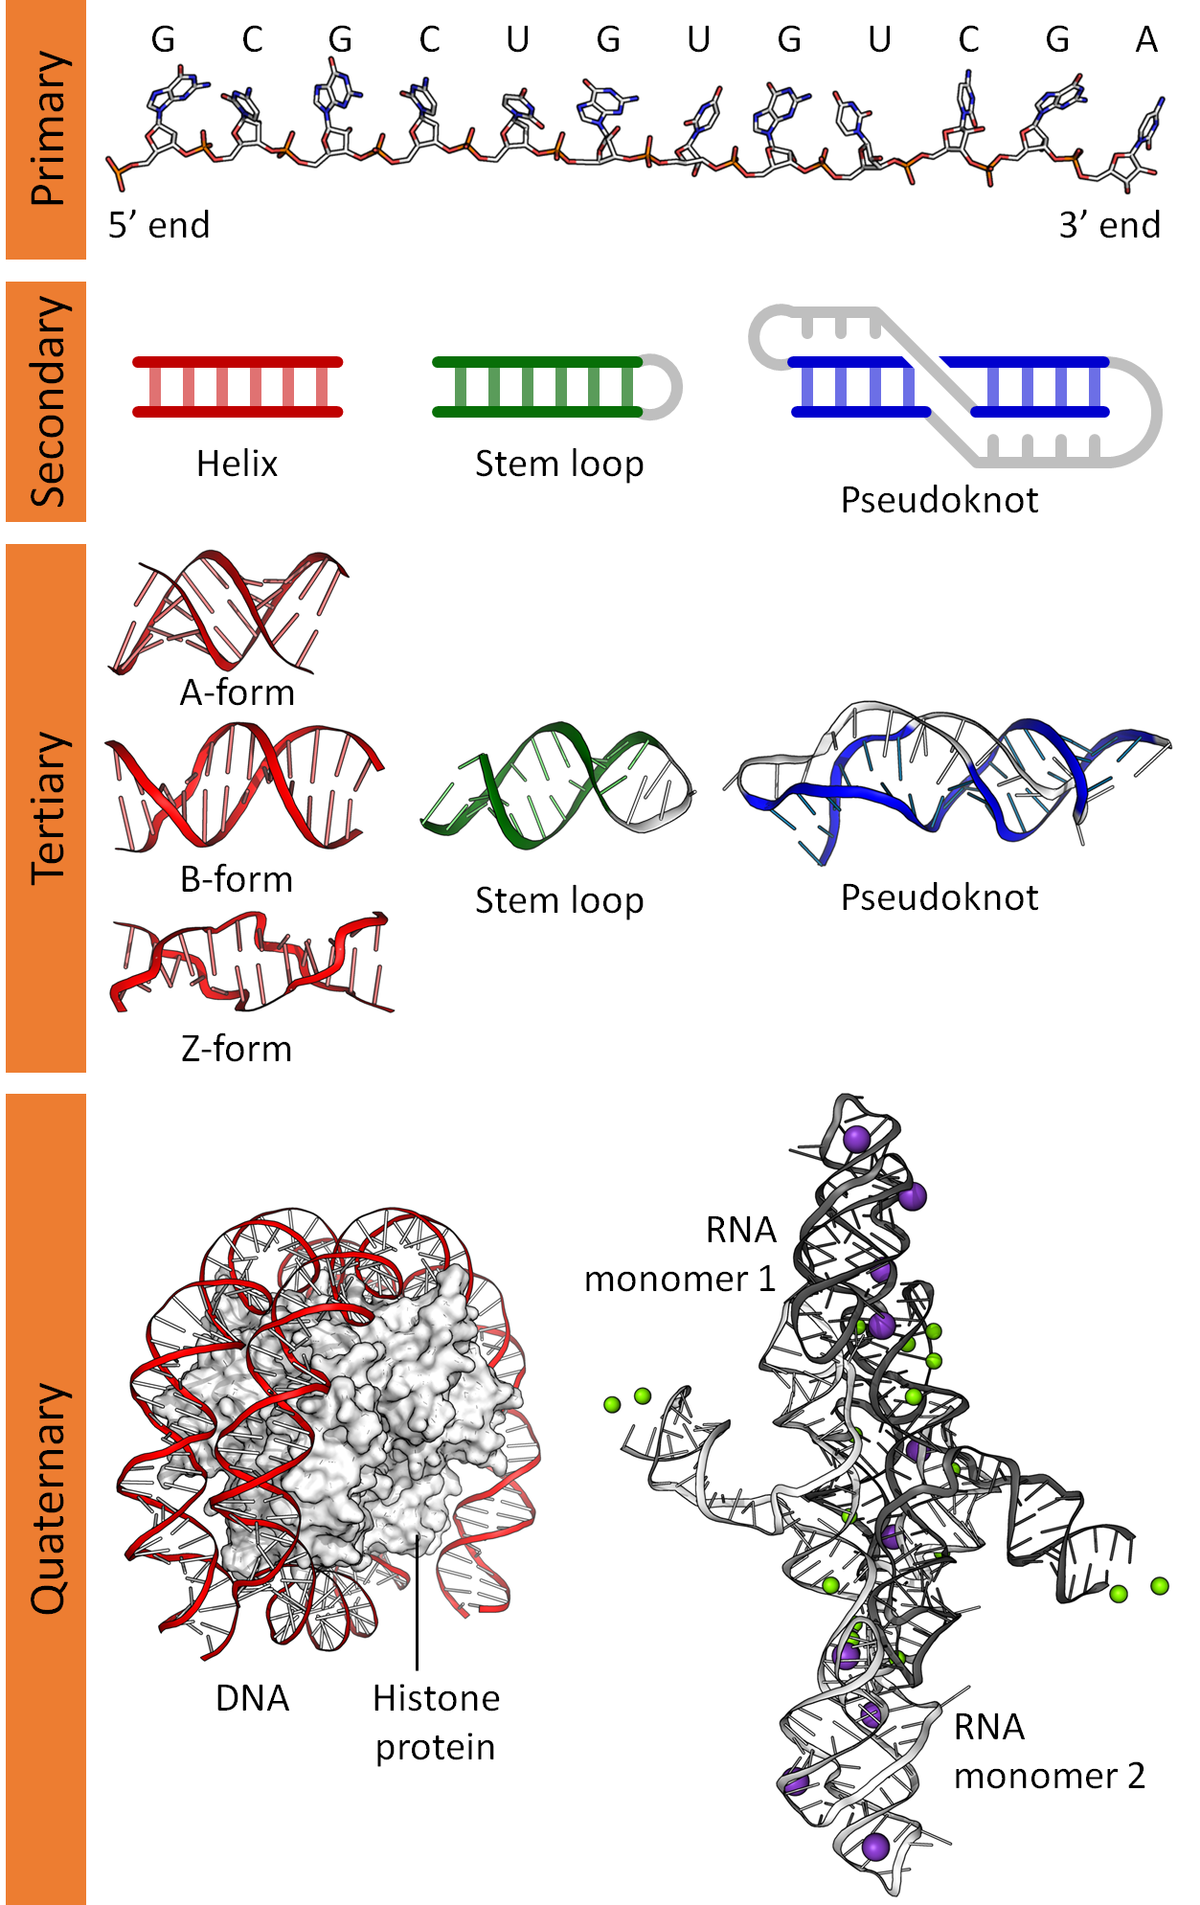 <p>•Primary-sequence of bases (DNA sequencing)</p><p>• Secondary-helical structure (X-ray and chemistry)A, B, Z-DNA, 3- and 4-stranded DNA Holliday junctions, hairpin loops</p><p>• Tertiary-DNA supercoiling (Electron microscopy)</p><p>• Quaternary- interlocked chromosomes; DNA complexed with proteins in chromatin</p>